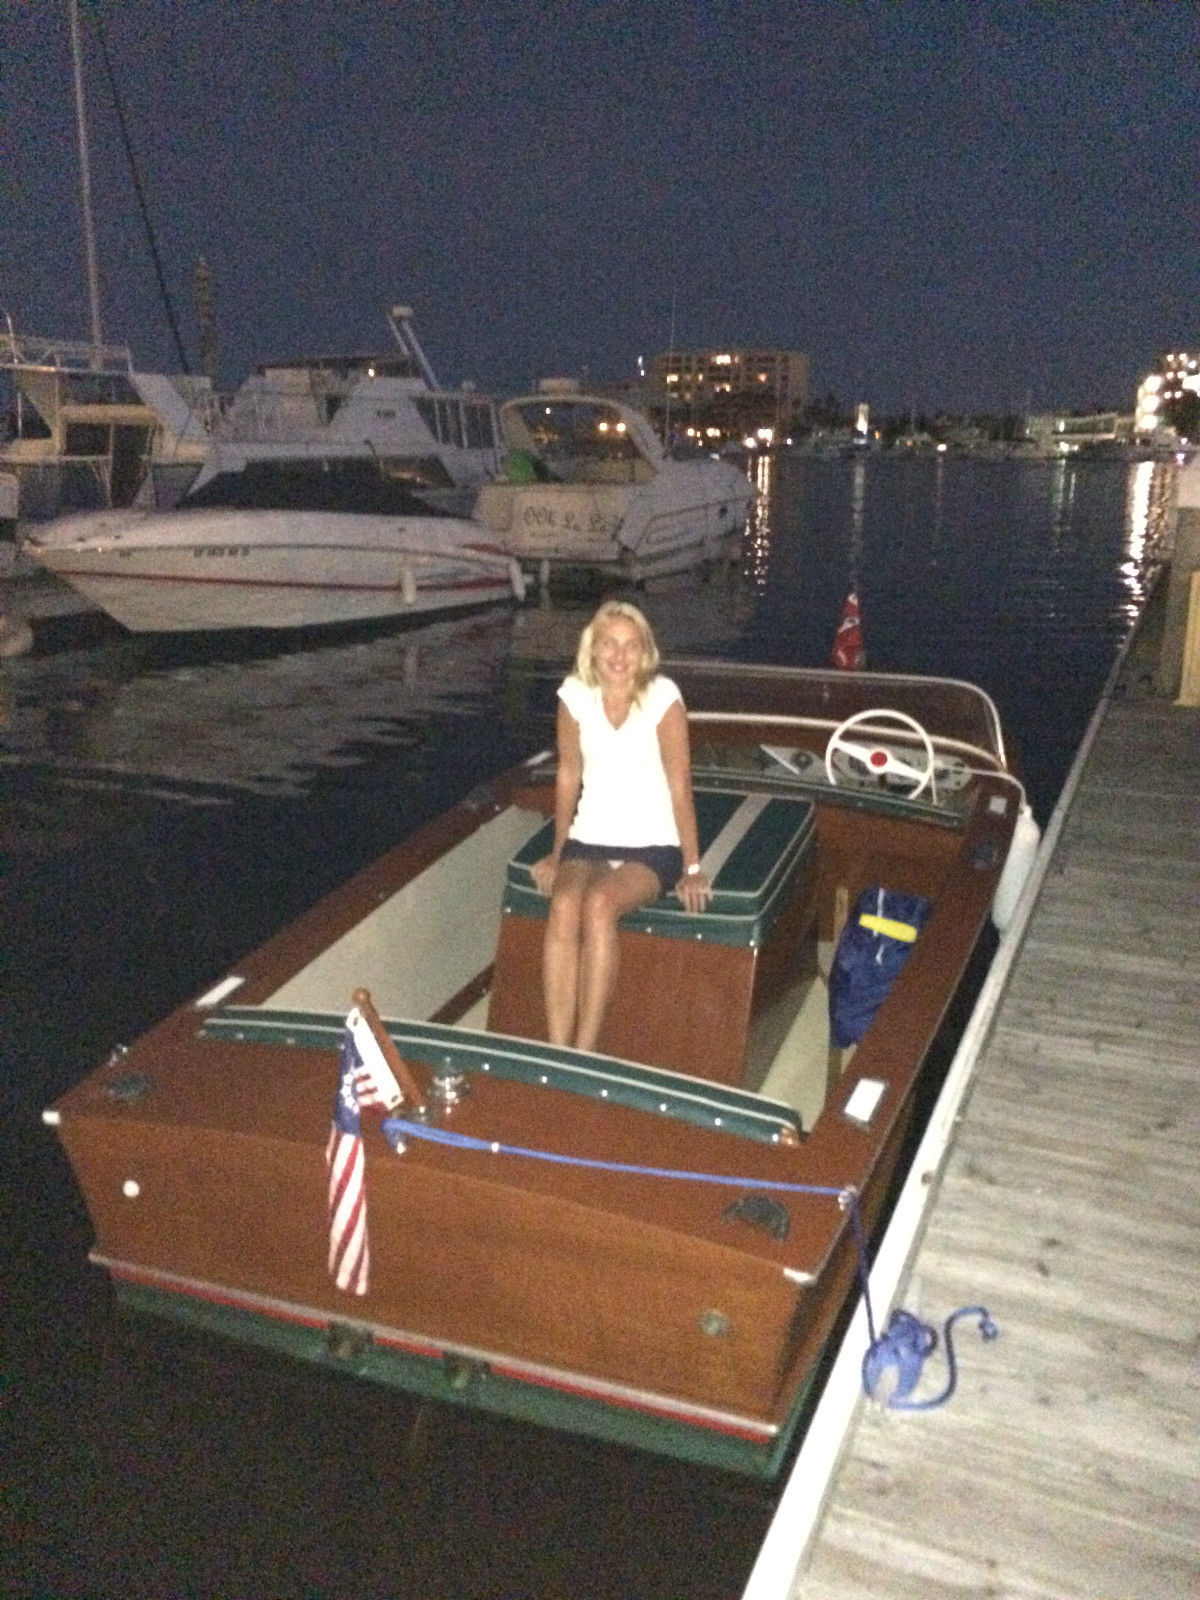 Chris Craft Cavalier Classic Wood Boat boat for sale from USA